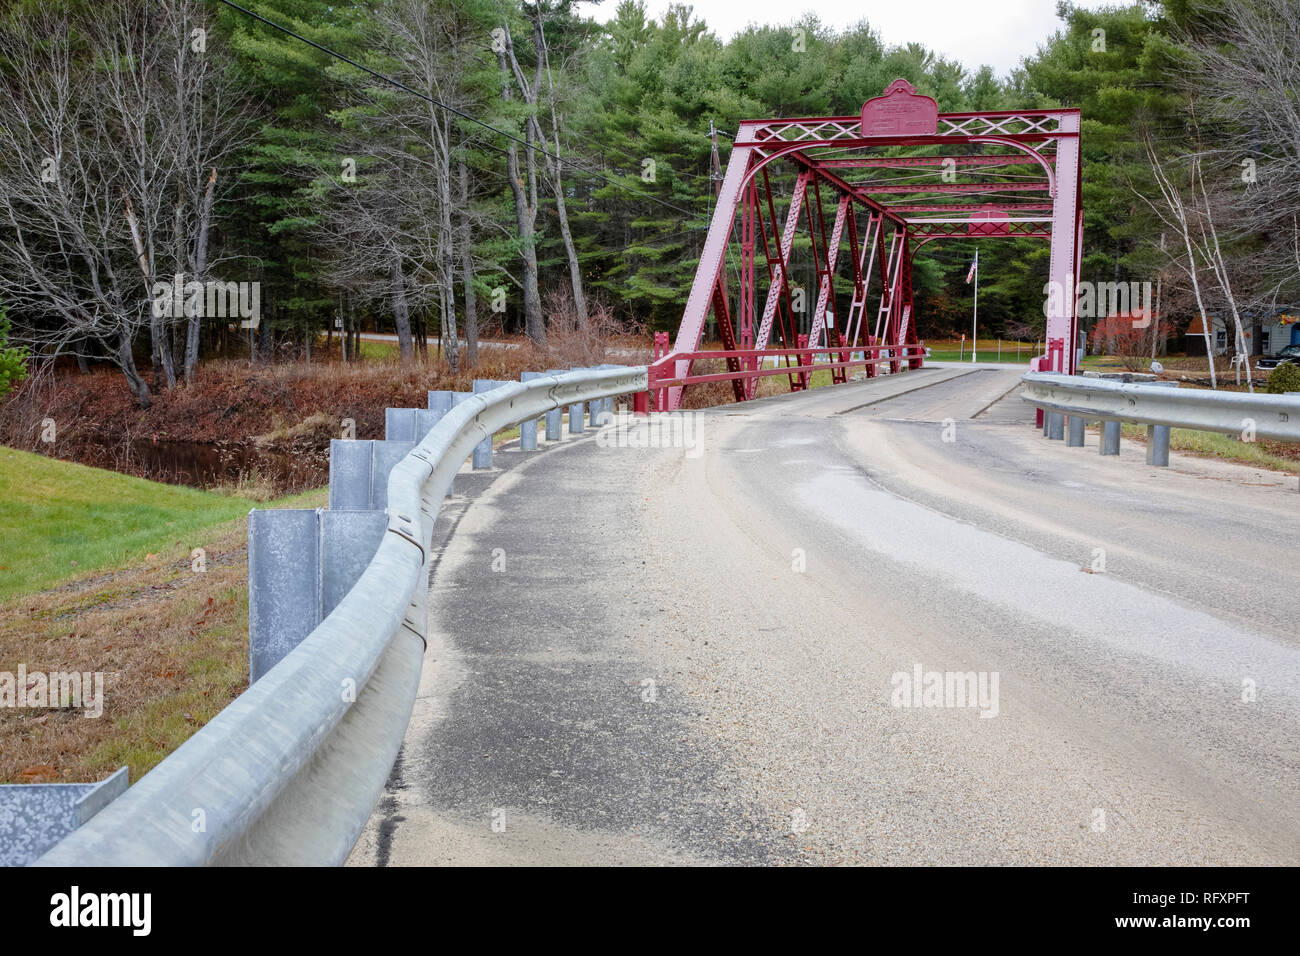 Ryefield Bridge in Otisfield, Maine. This is the last remaining suspension bridge of its style in the State of Maine and it is listed on the National  Stock Photo